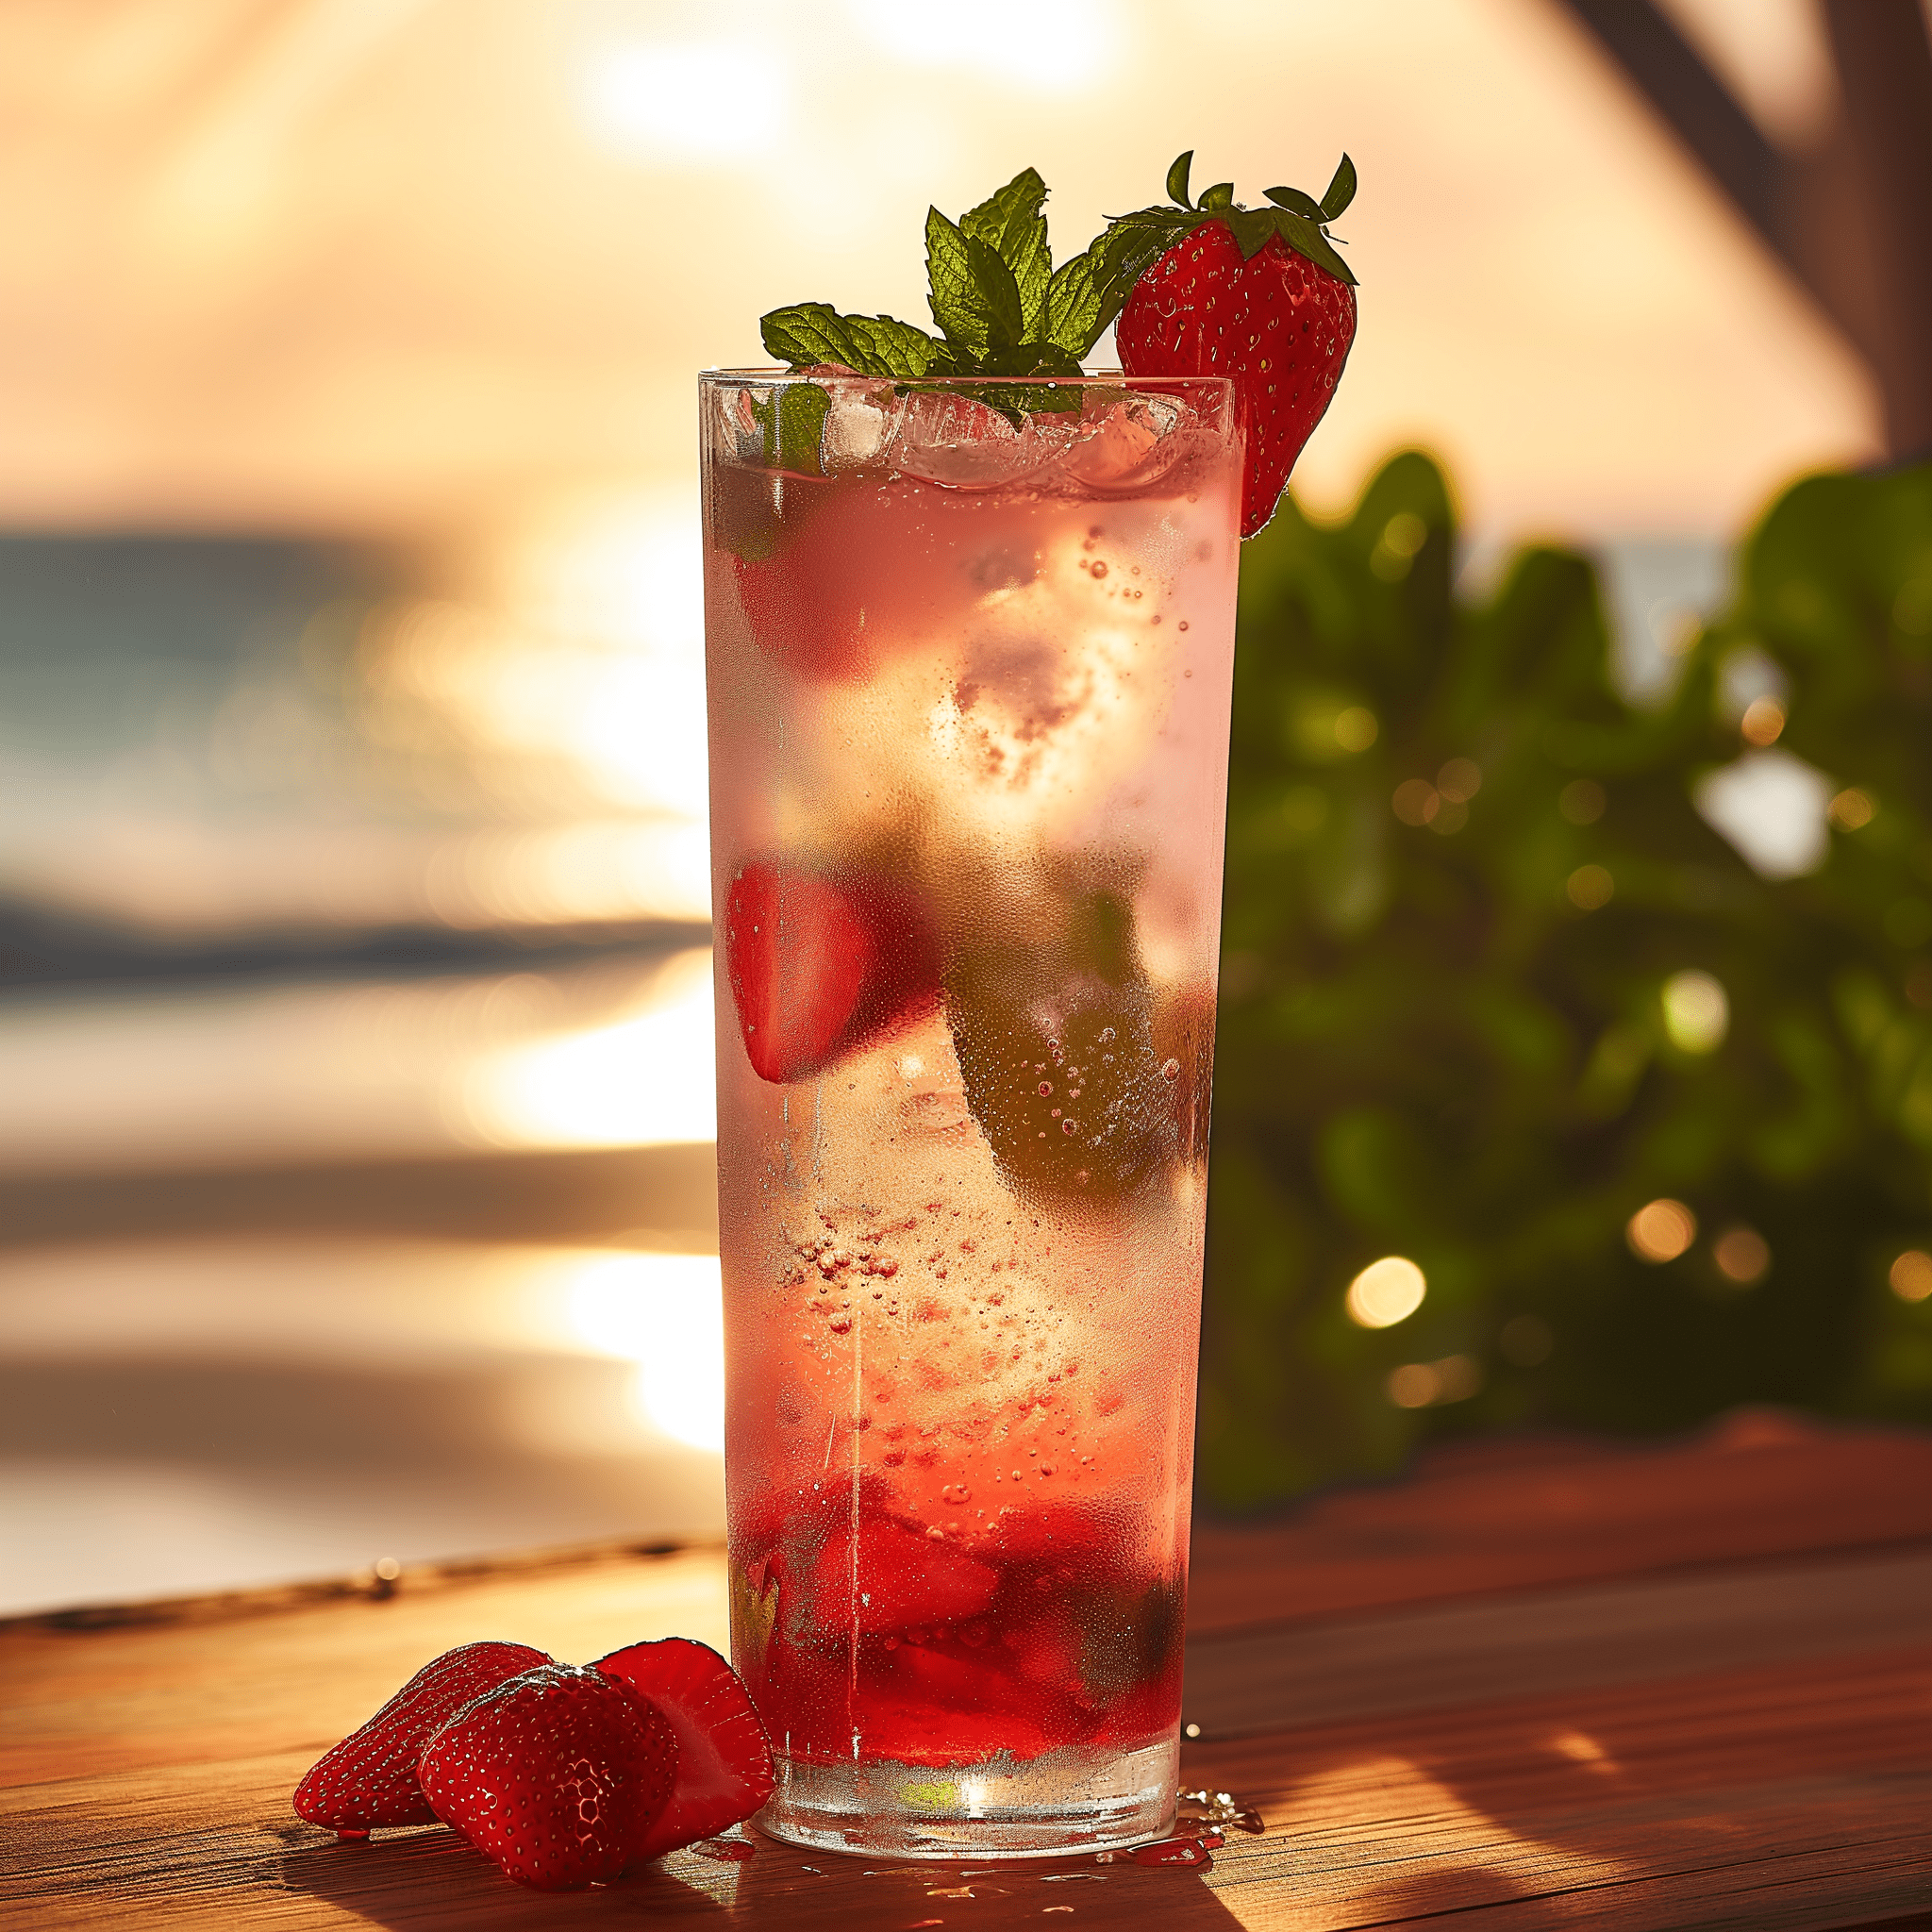 Strawberry Mojito Mocktail Recipe - This Strawberry Mojito Mocktail is a refreshing blend of sweet and zesty flavors. The ripe strawberries contribute a juicy, fruity sweetness, while the mint provides a cool, crisp undertone. The lime juice adds a tangy kick, and the soda water gives it a fizzy lift. It's a vibrant and invigorating drink that's perfect for sipping on a hot day.